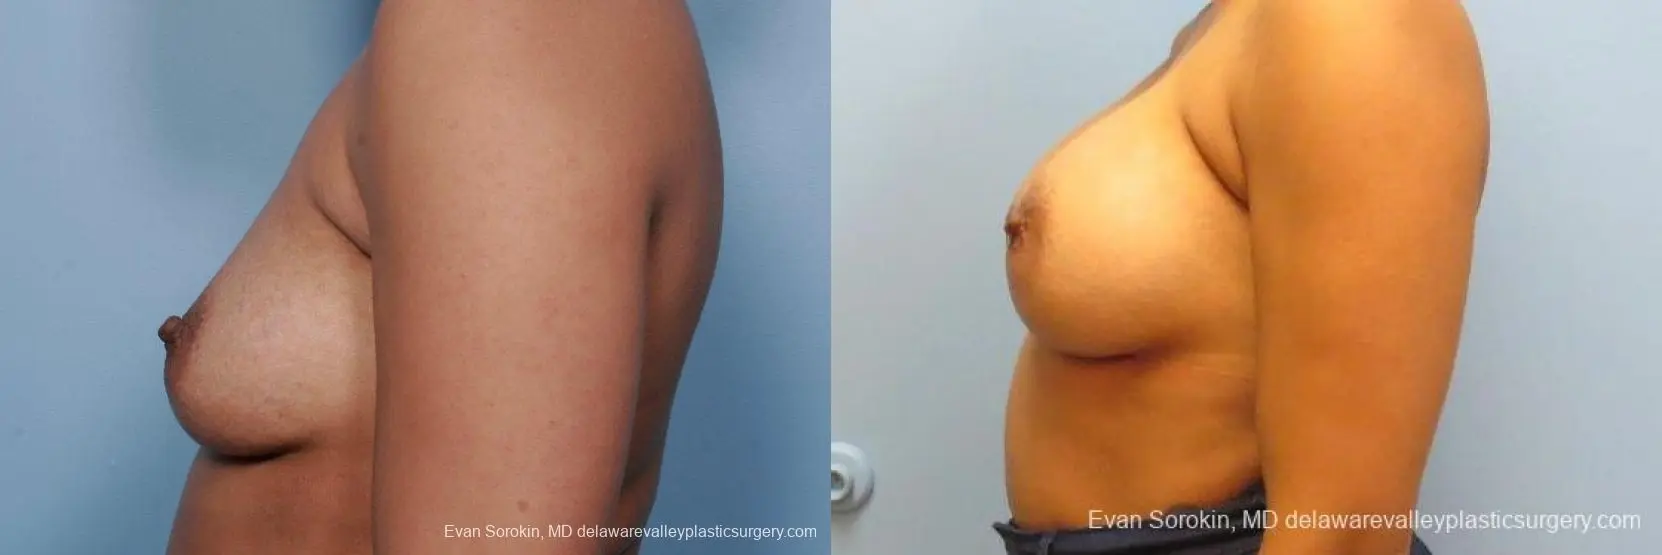 Philadelphia Breast Augmentation 9387 - Before and After 5